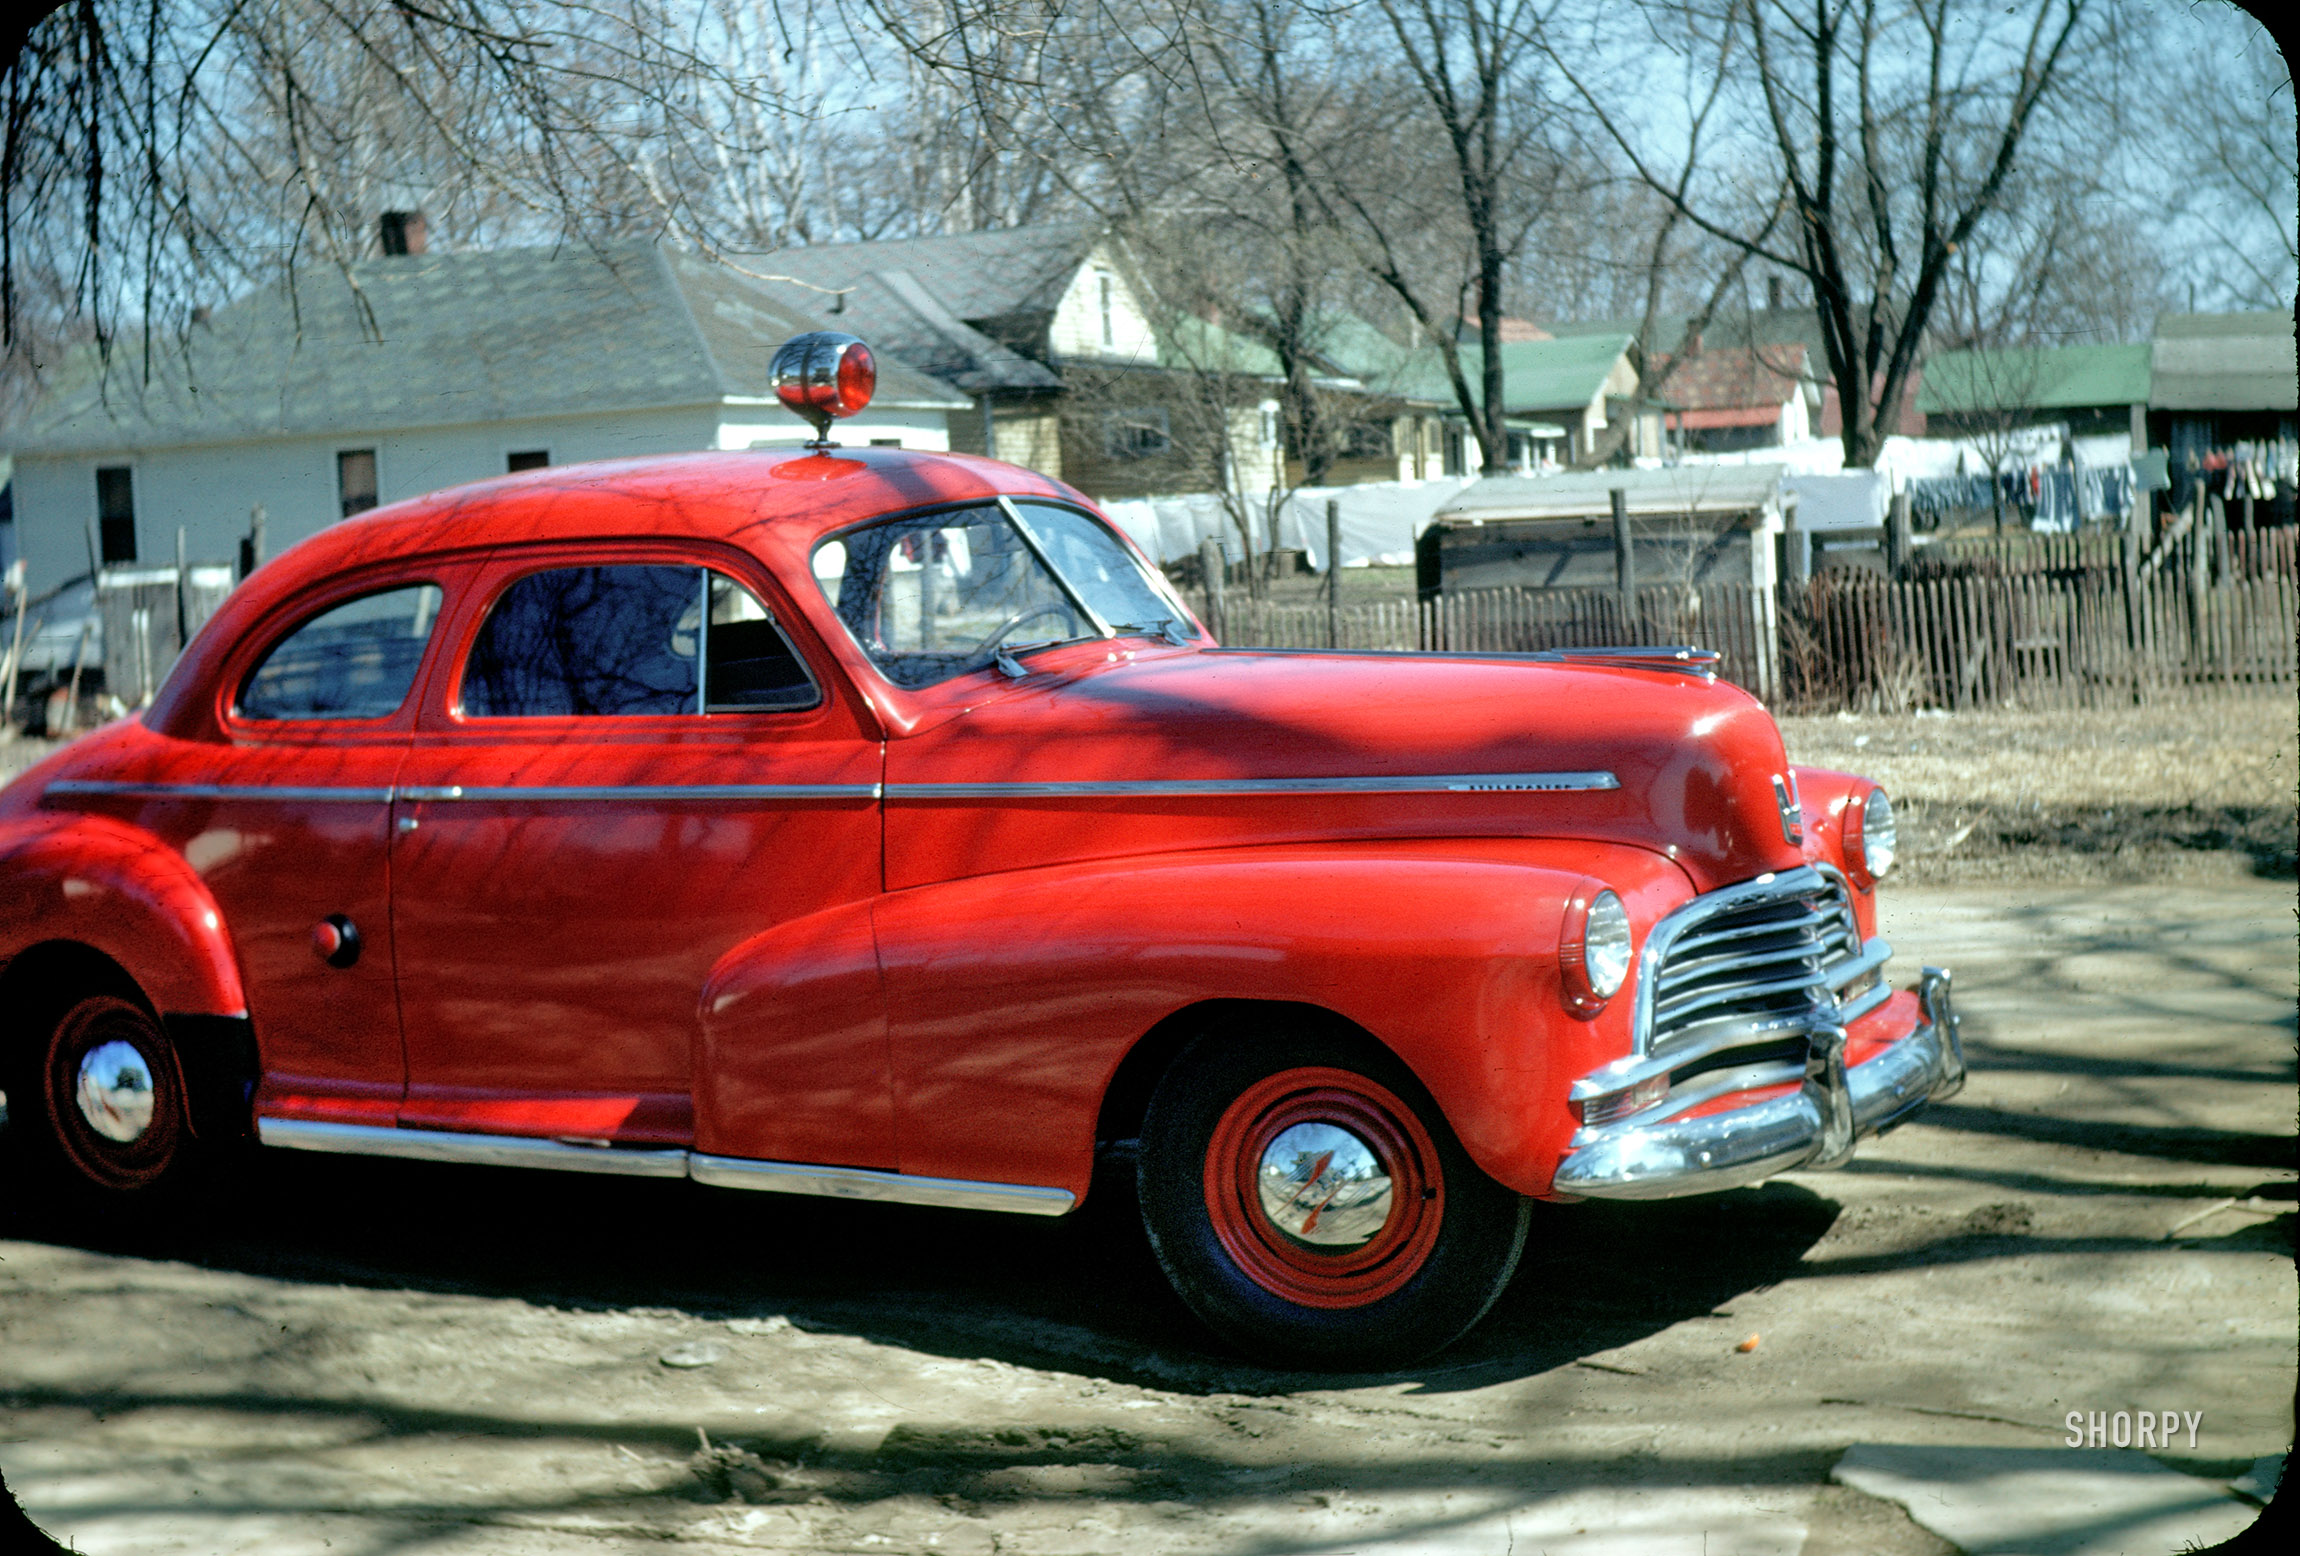 Our second scan from this batch of color slides I found on eBay is of what looks to be a Fire Department car, snapped in 1949. There are many clues in this batch as to the location, but I thought it might be fun to let people guess as the series progresses. 35mm Kodachrome red-border transparency. View full size.